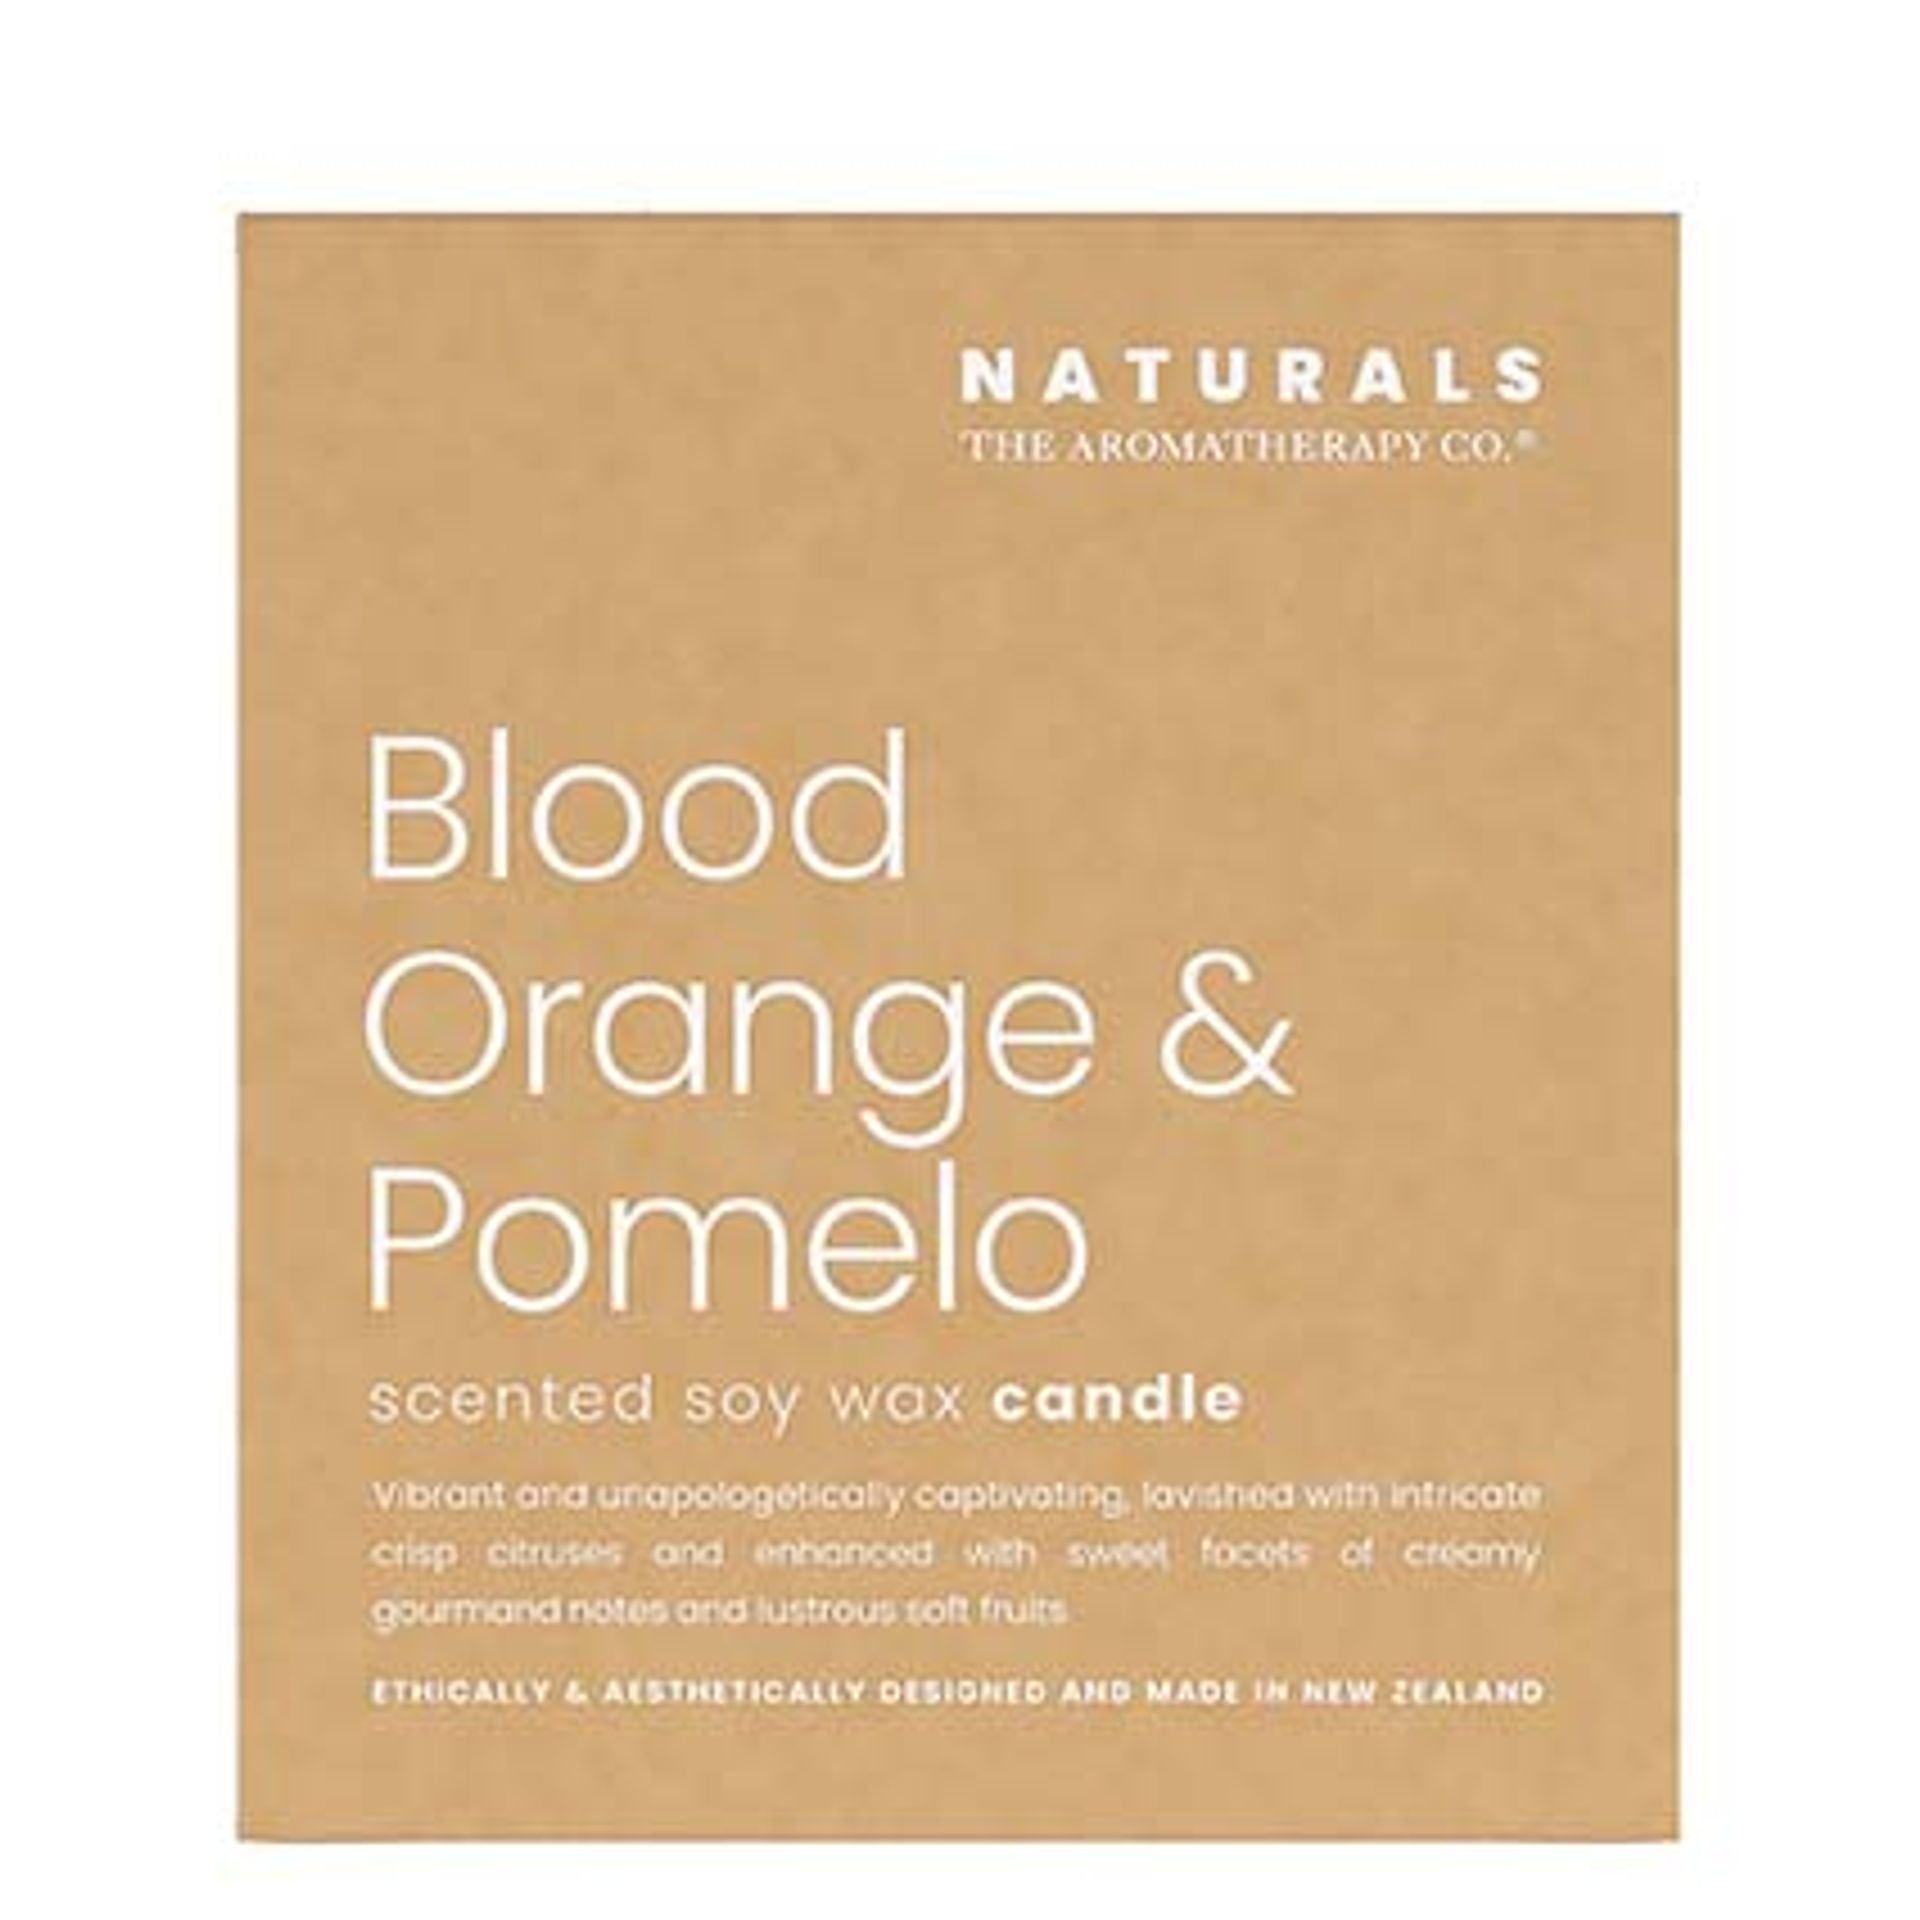 The Aromatherapy Co Naturals  Blood Orange & Pomelo Candle